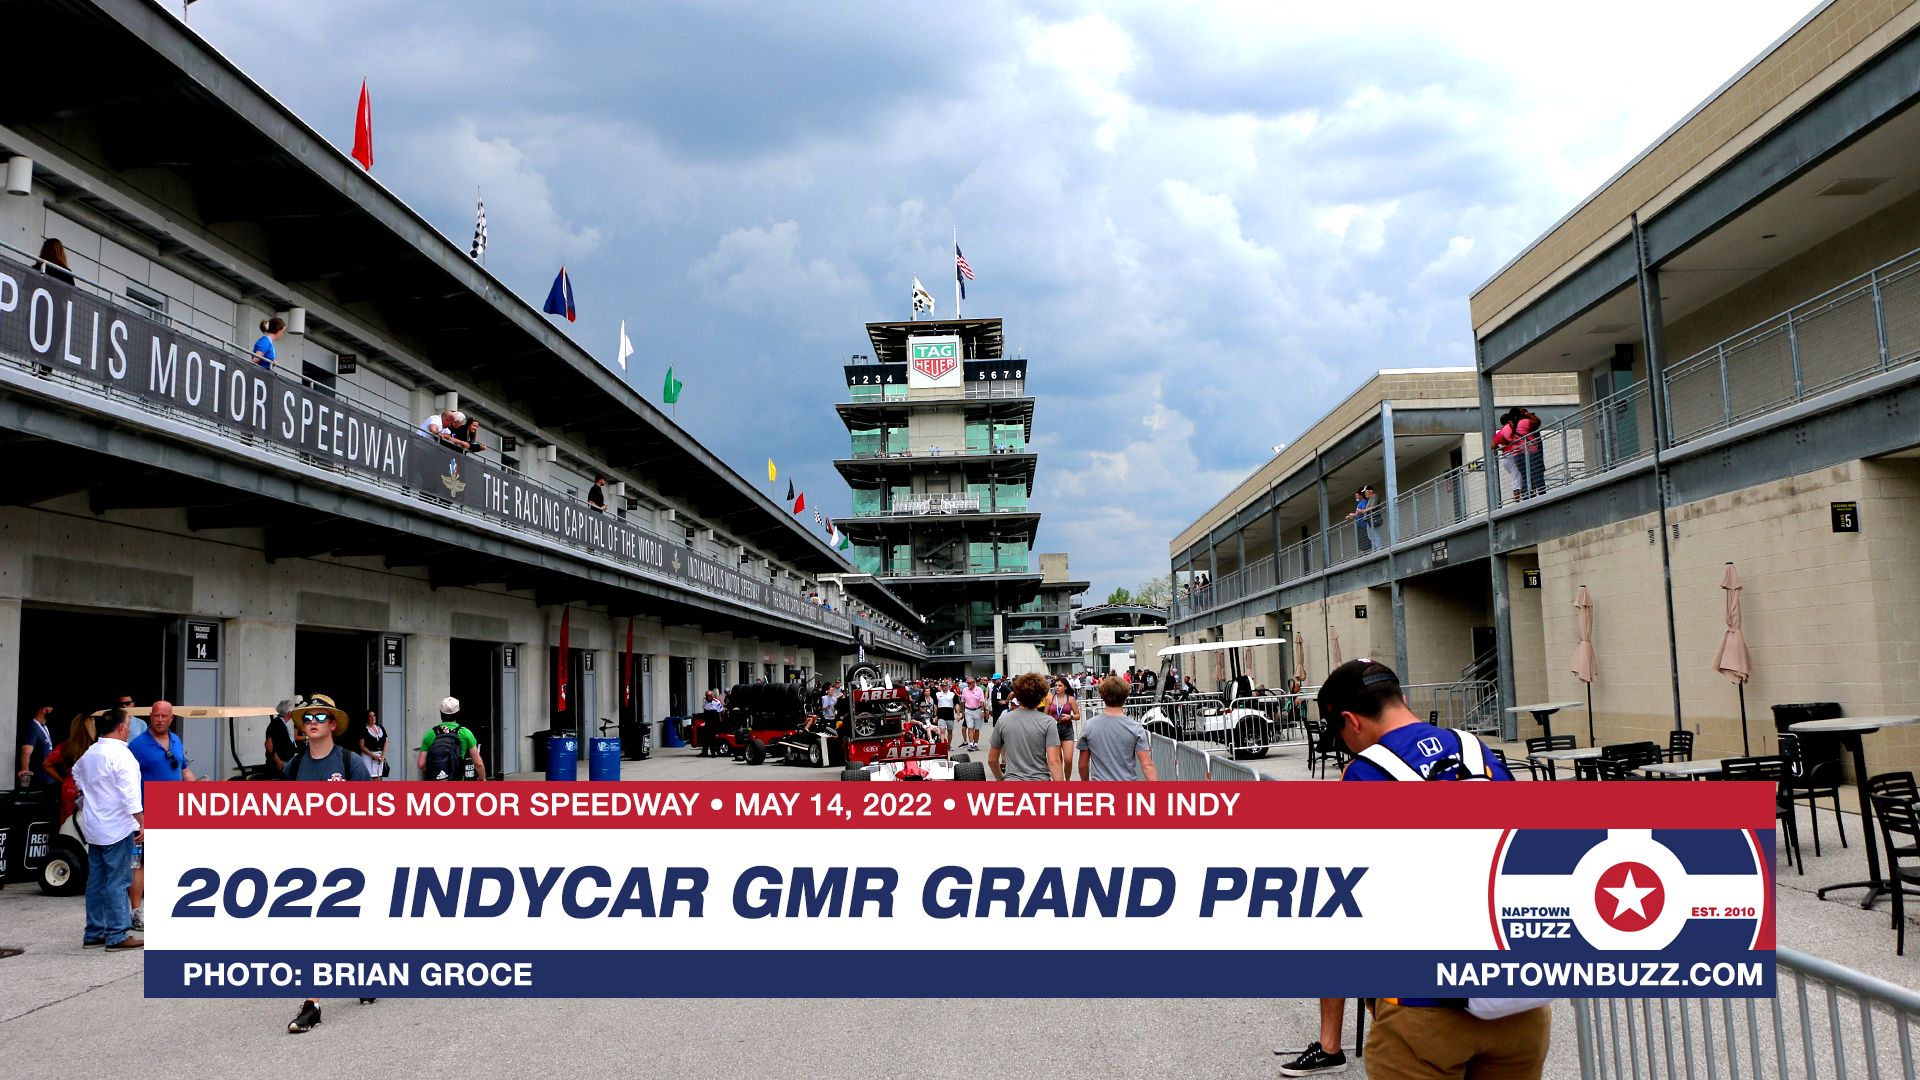 Indy Car Grand Prix Race Day, May 14, 2022